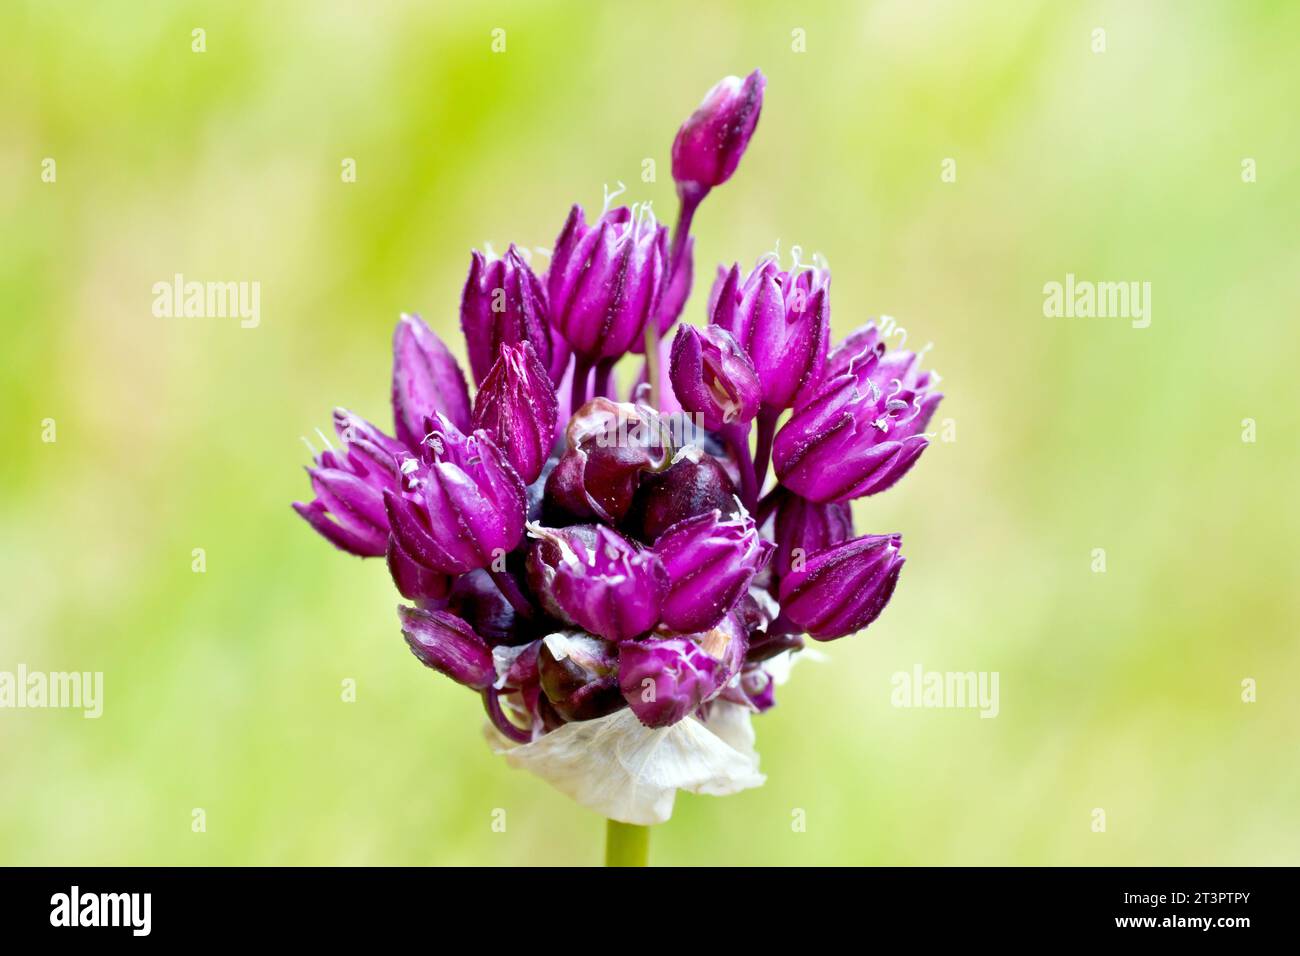 Close up of a species of allium, possibly Field Garlic (allium oleraceum), showing the purple flowers beginning to open. Stock Photo